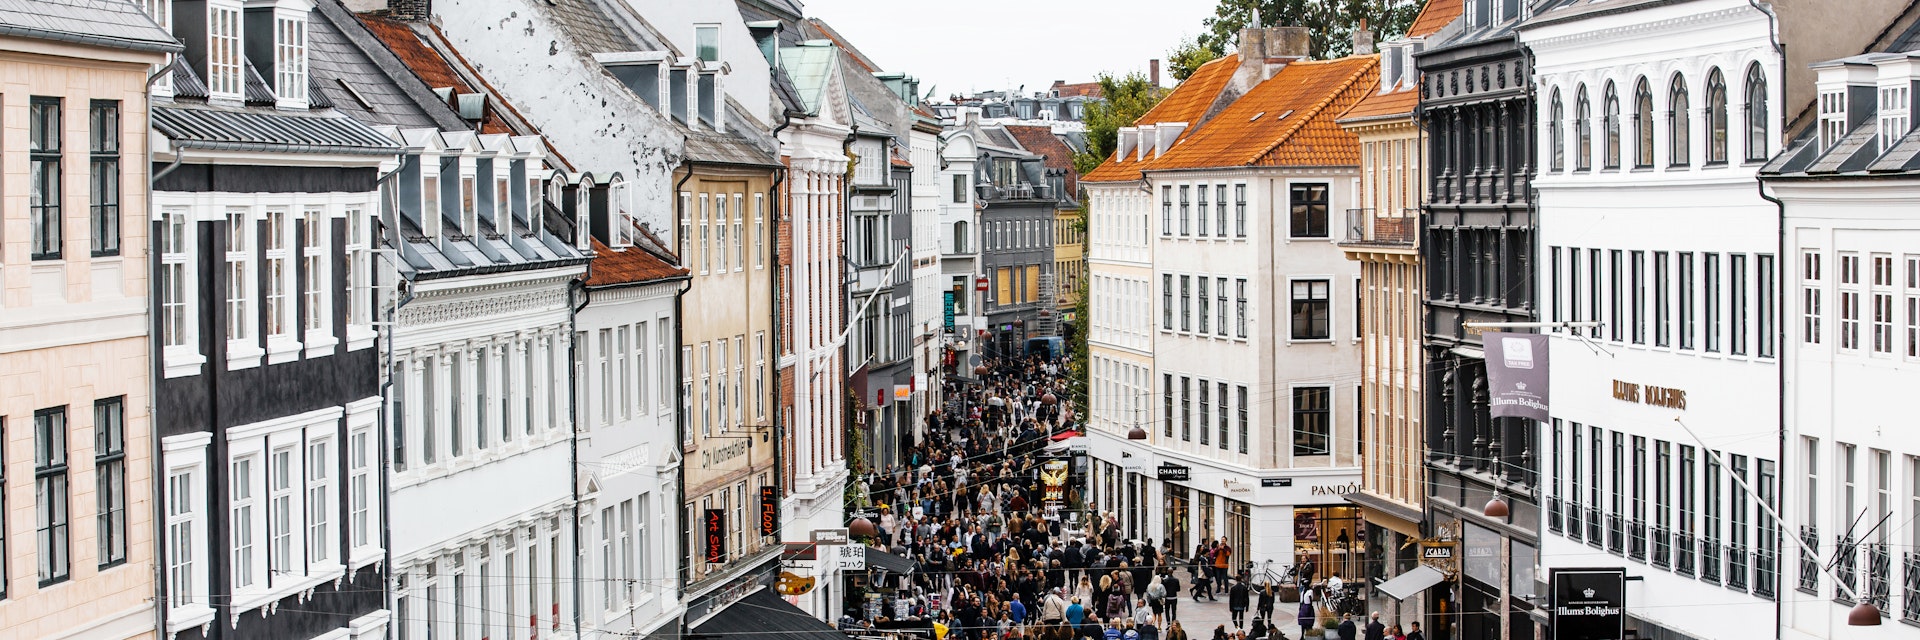 High-angle view of a busy shopping street in Copenhagen.
Rooftop, Photography, Denmark, Road, Population Explosion, Scandinavian Culture, Overcast, City, Window, Cafe, Tourist, Consumerism, Restaurant, Copenhagen, Facade, City Life, Danish Culture, Aerial View, Urban Skyline, Day, Diminishing Perspective, Amagertorv, Crowd, Retail, City Street, Capital Cities, Town Square, Sky, Street, Famous Place, International Landmark, Large Group Of People, Tourism, Retail Place, Shopping, Travel, Cityscape, Architecture, Old, Oresund Region, Building Exterior, People, Color Image, Sidewalk Cafe, Outdoors, High Angle View, Travel Destinations, Horizontal, Pedestrian Zone